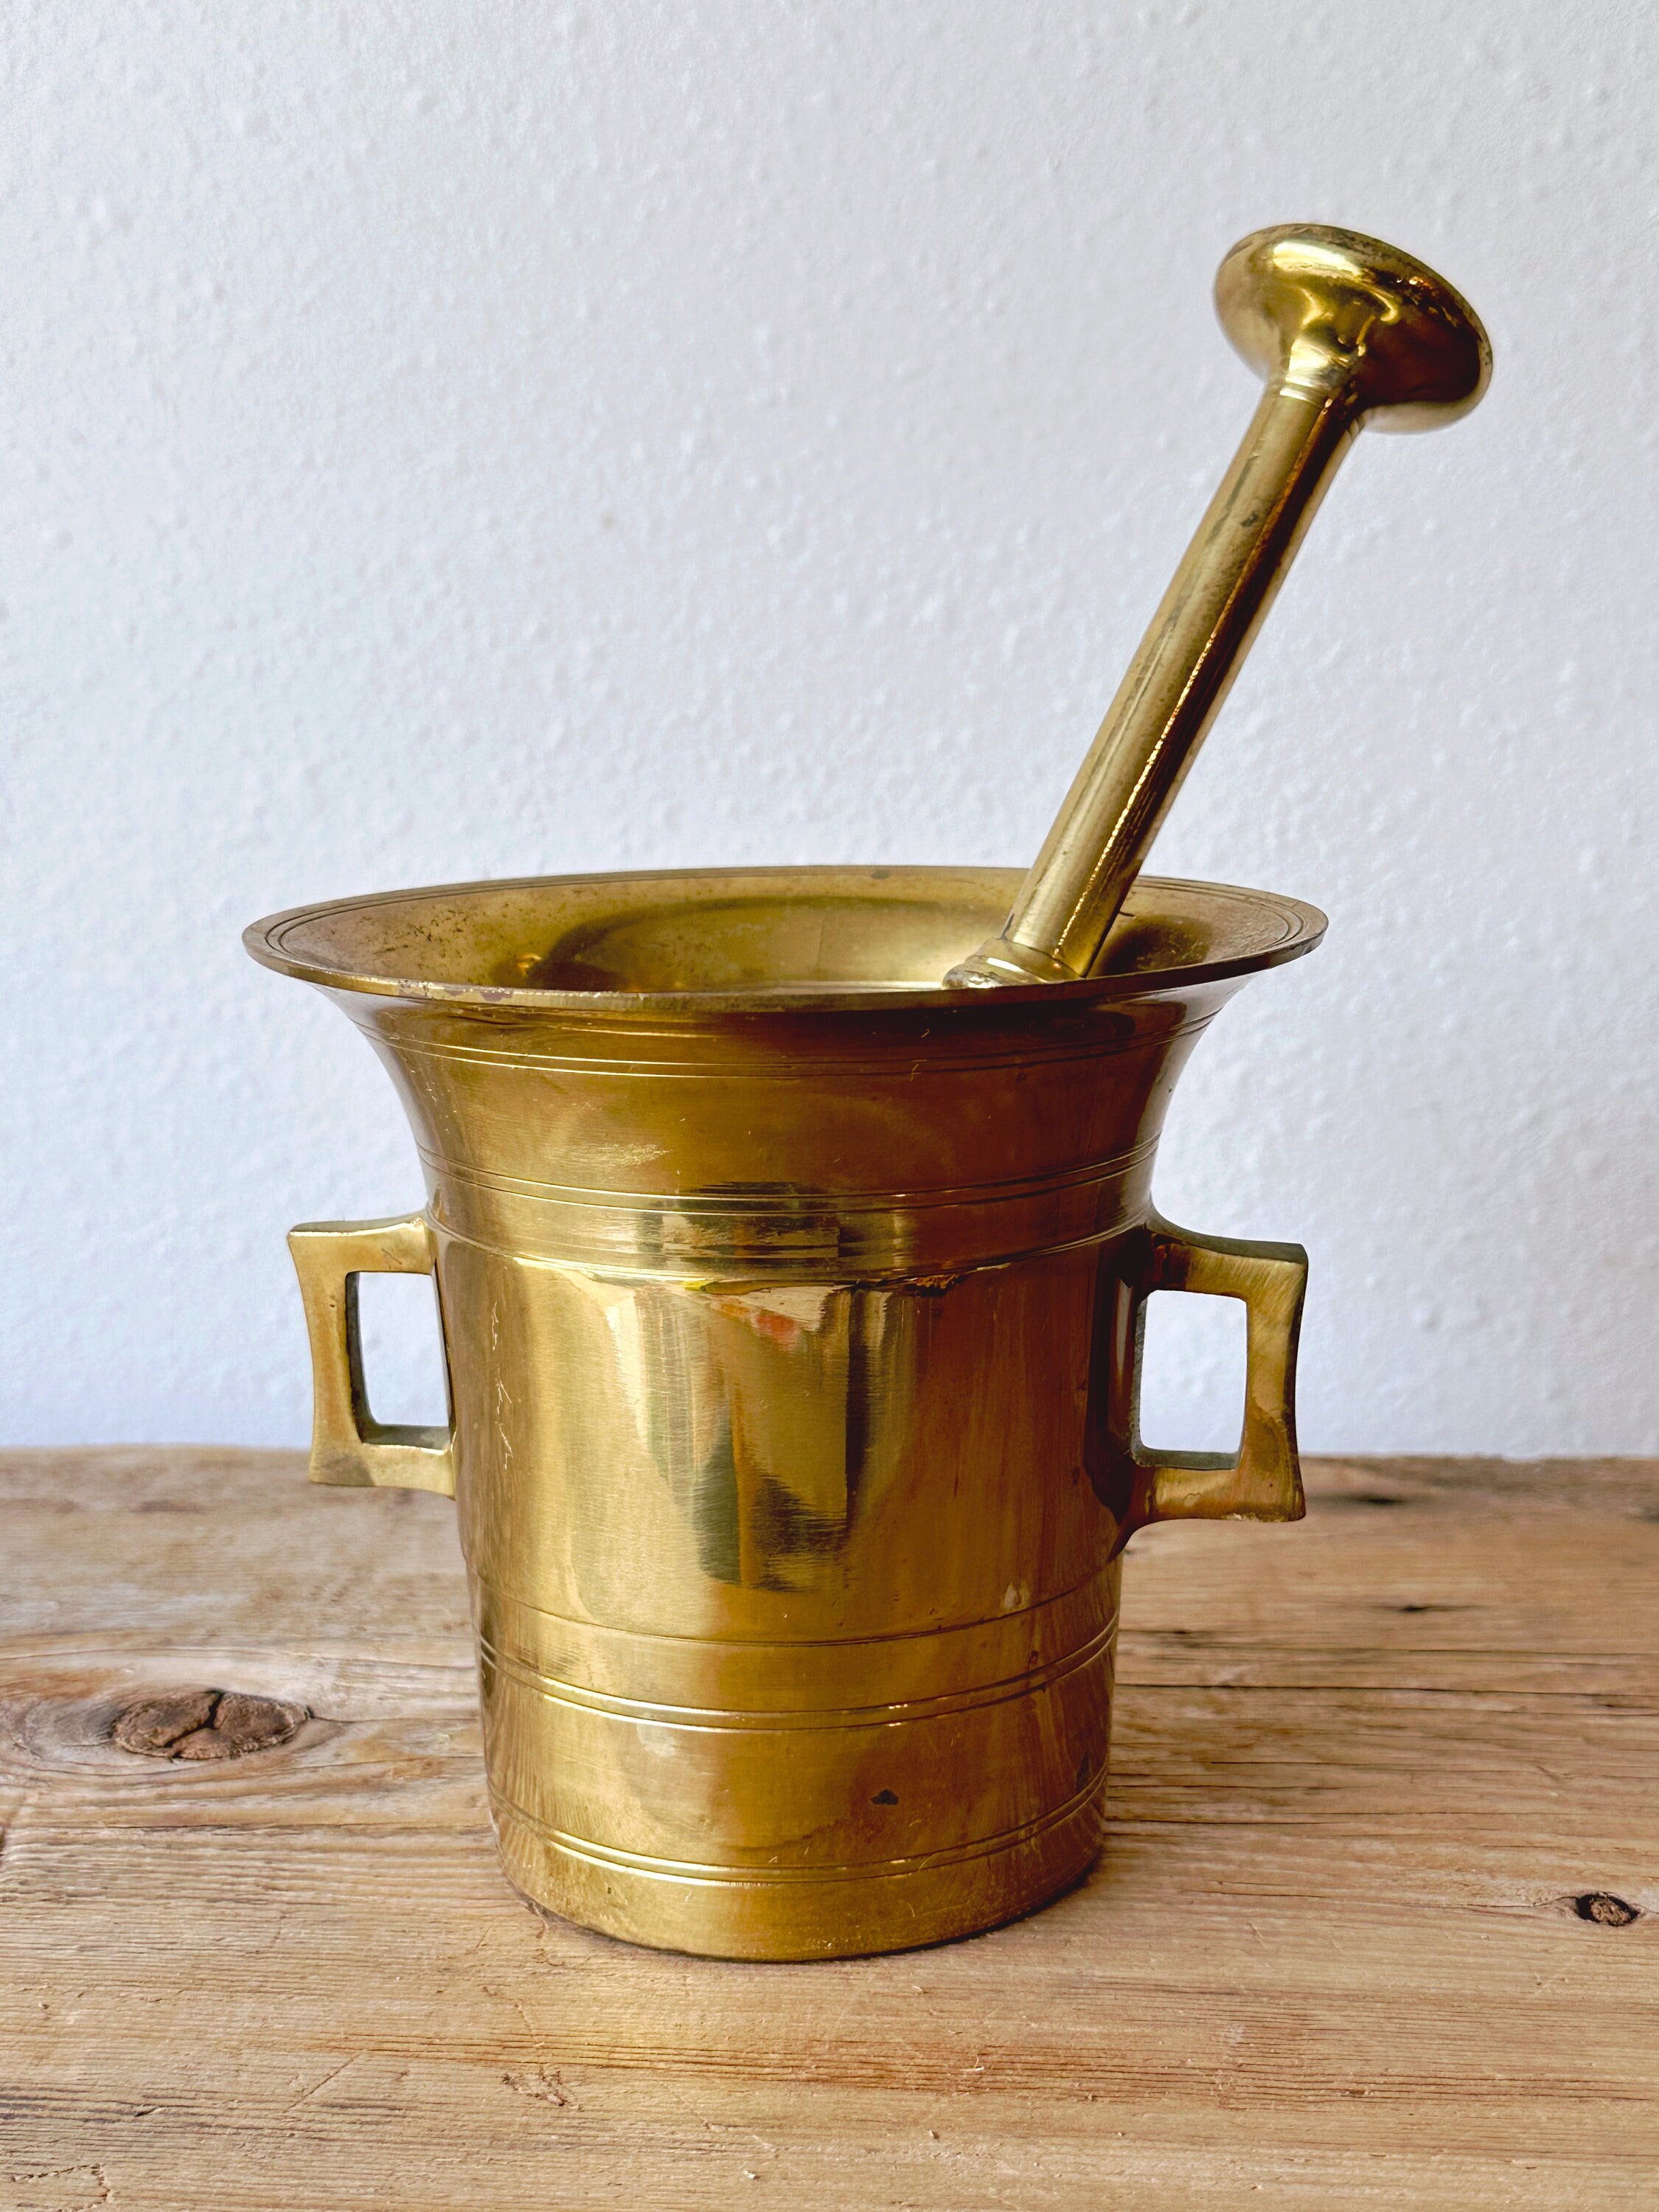 Vintage Brass Pharmacy Mortar & Pestle | Herbs, Spices, Medicine Grinder | Antique Apothecary Kitchen Decor | Gift for the Cook Housewarming